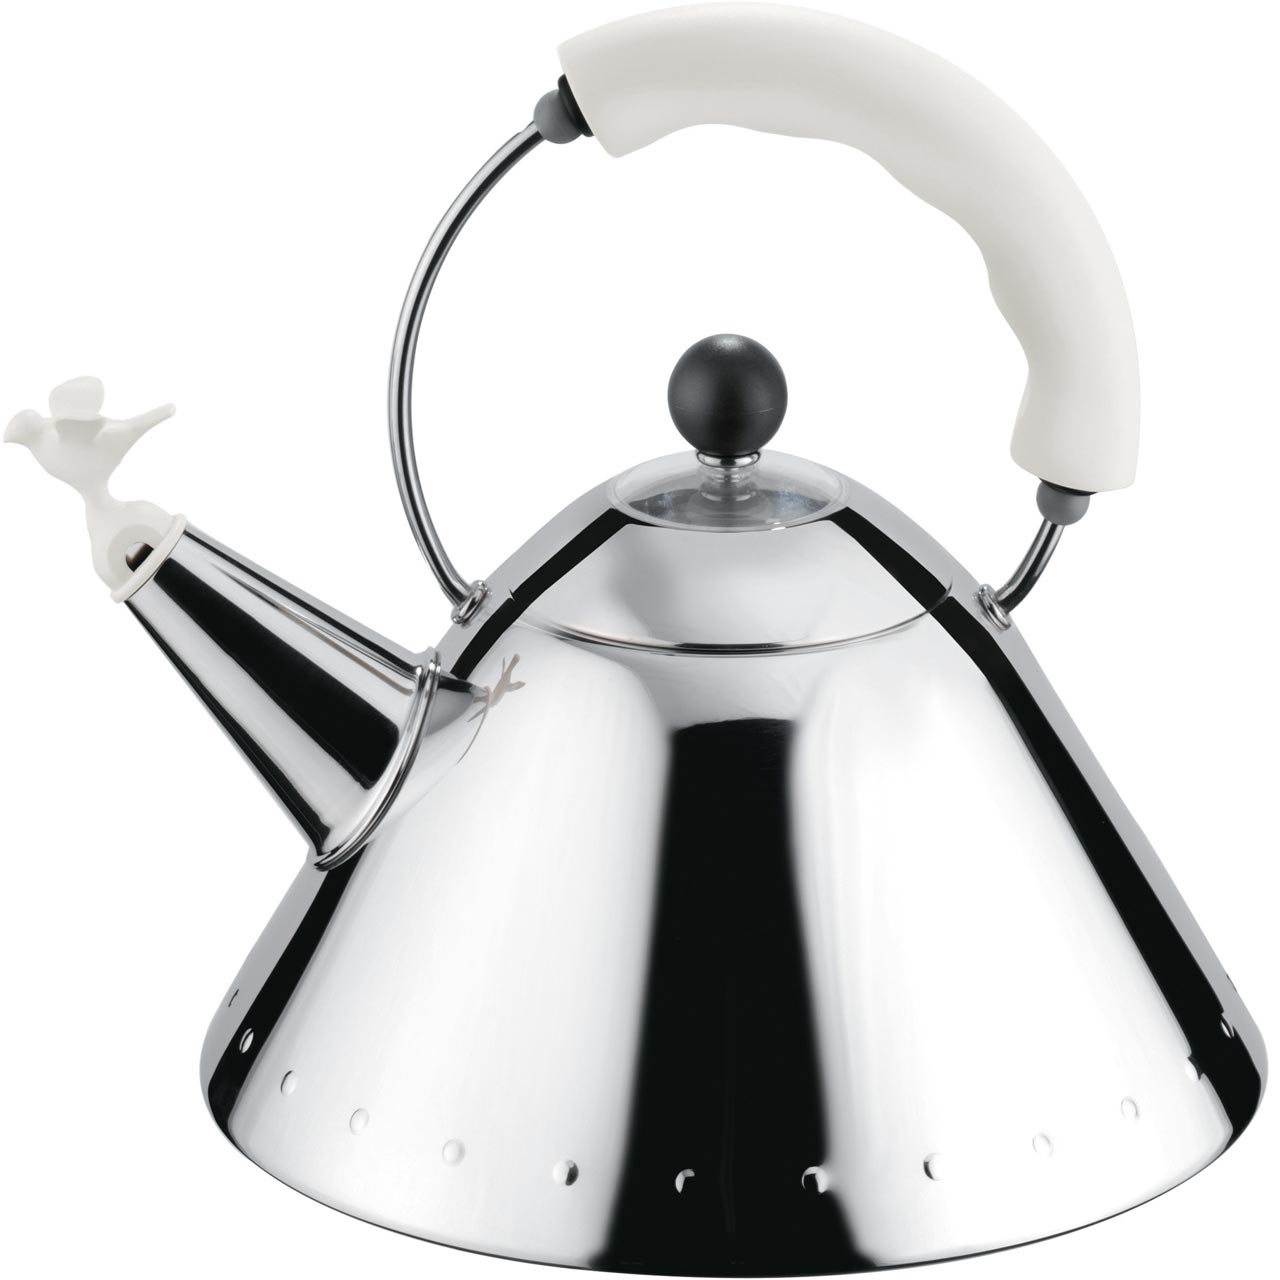 Alessi Bird Whistle Kettle 9093 by Michael Graves